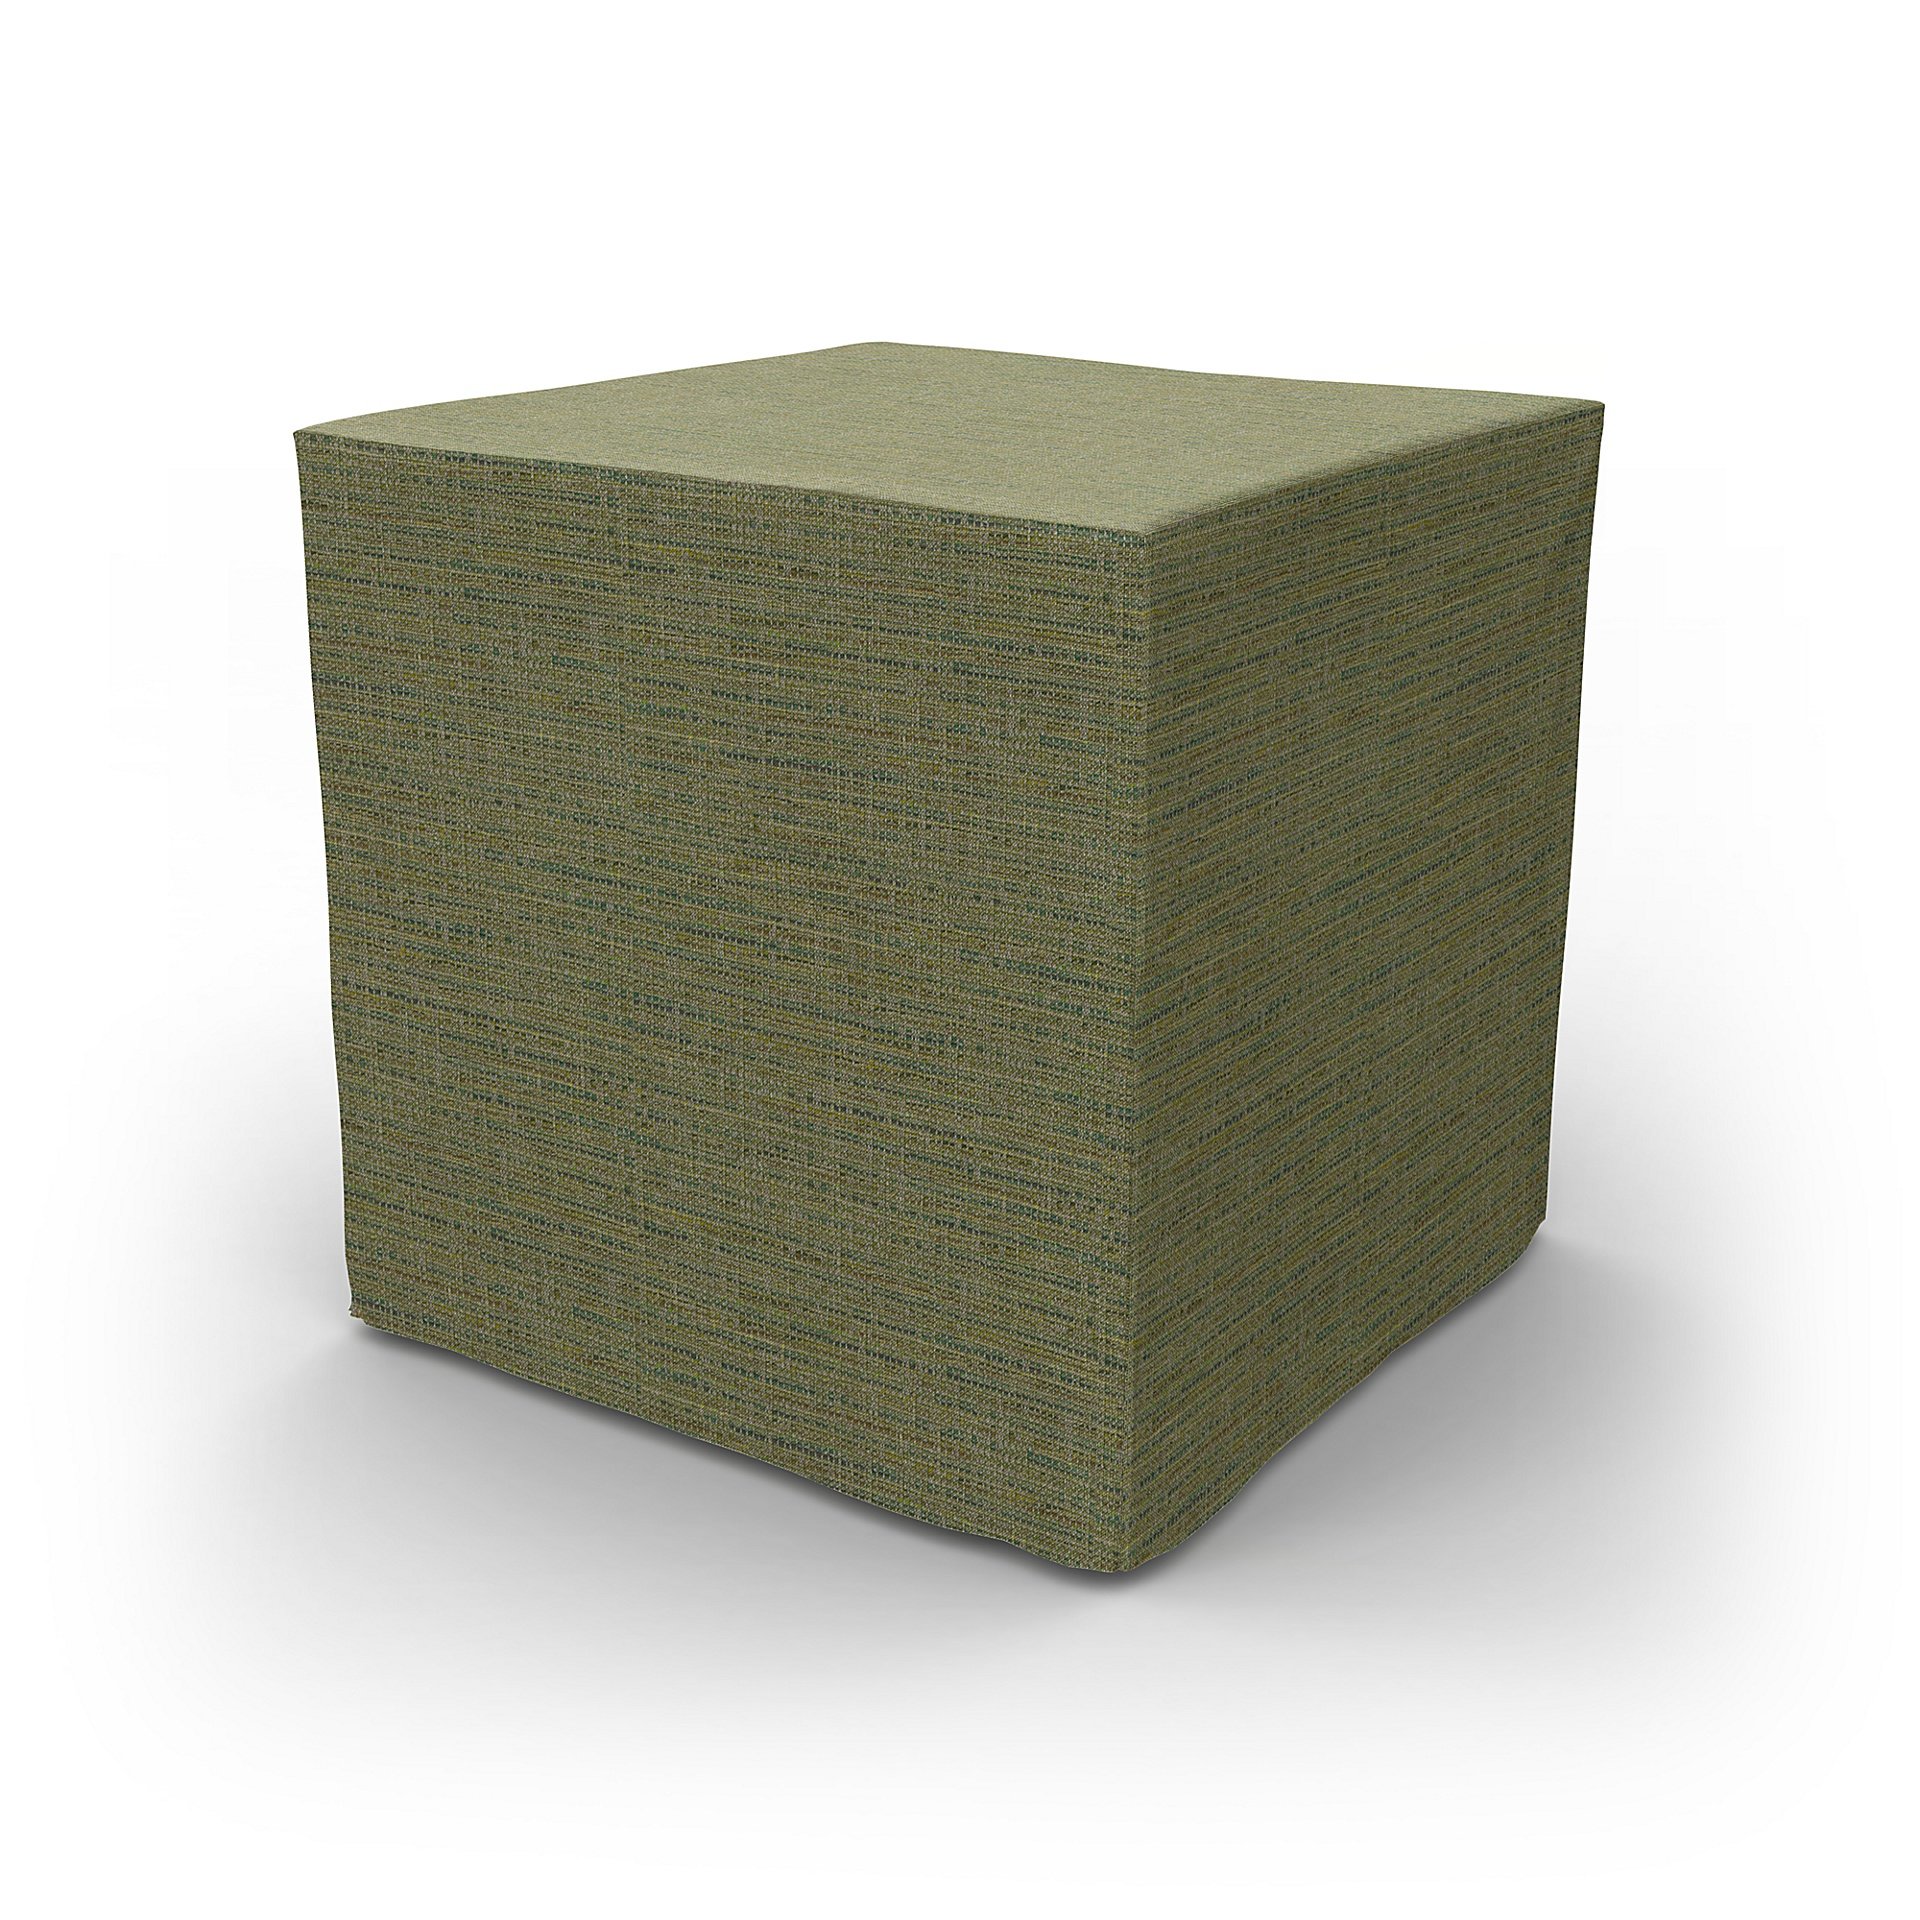 IKEA - Pallbo Footstool Cover, Meadow Green, Boucle & Texture - Bemz